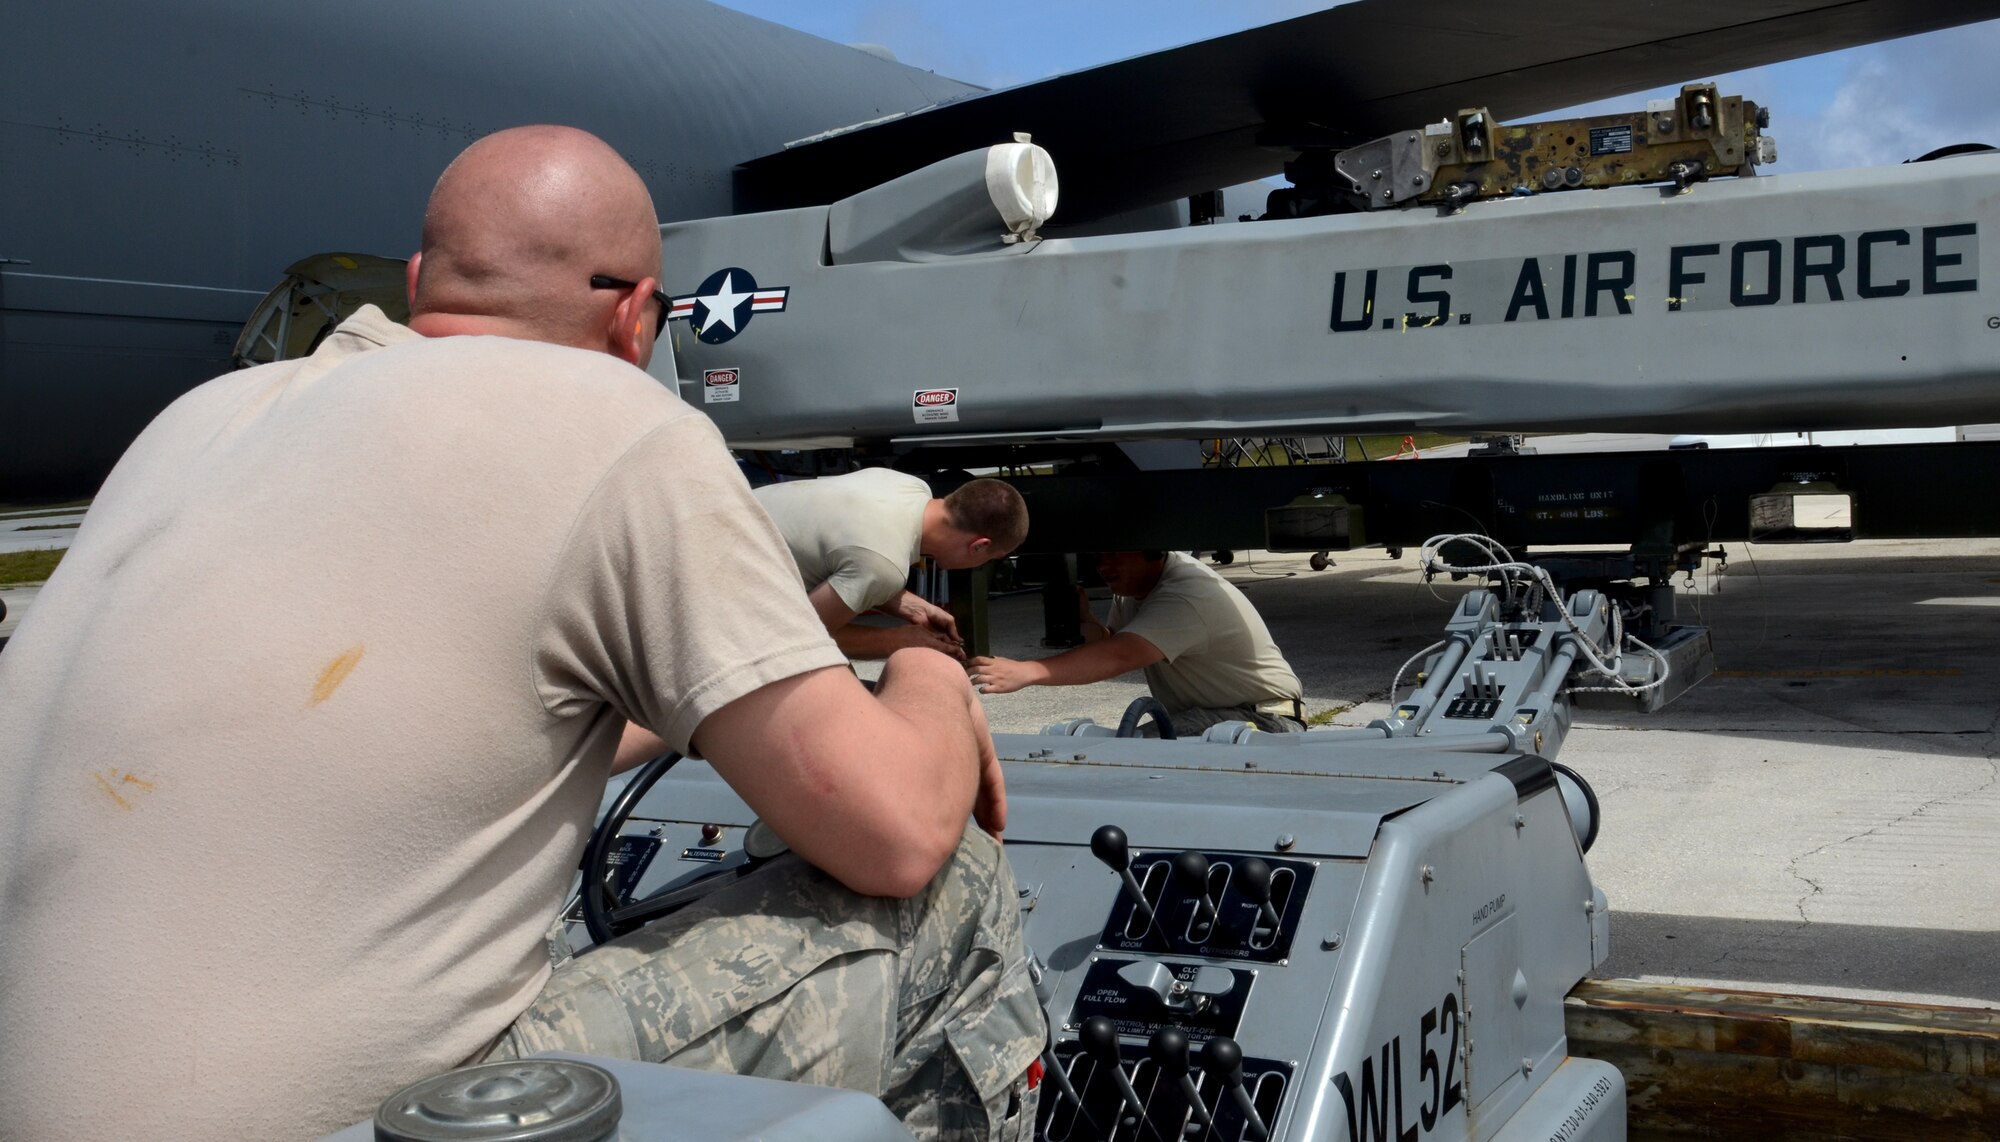 Airmen from the 36th Expeditionary Aircraft Maintenance Squadron, deployed from the 23rd Expeditionary Aircraft Maintenance Unit, Minot Air Force Base, N.D., prepare a training AGM-86C Conventional Air-Launched Cruise Missile for loading  on to a B-52 Stratofortress during a load demonstration at Andersen Air Force Base, Guam, April 16, 2013. All EAMUs deployed to Andersen have to pass a load inspection within 10 days of arrival as part of a U.S. Pacific Command requirement to ensure all tools and equipment are mission ready. It is opportunity for maintainers to obtain munitions-loading experience in both a training and tropical environment. (U.S. Air Force photo by Senior Airman Benjamin Wiseman/Released)